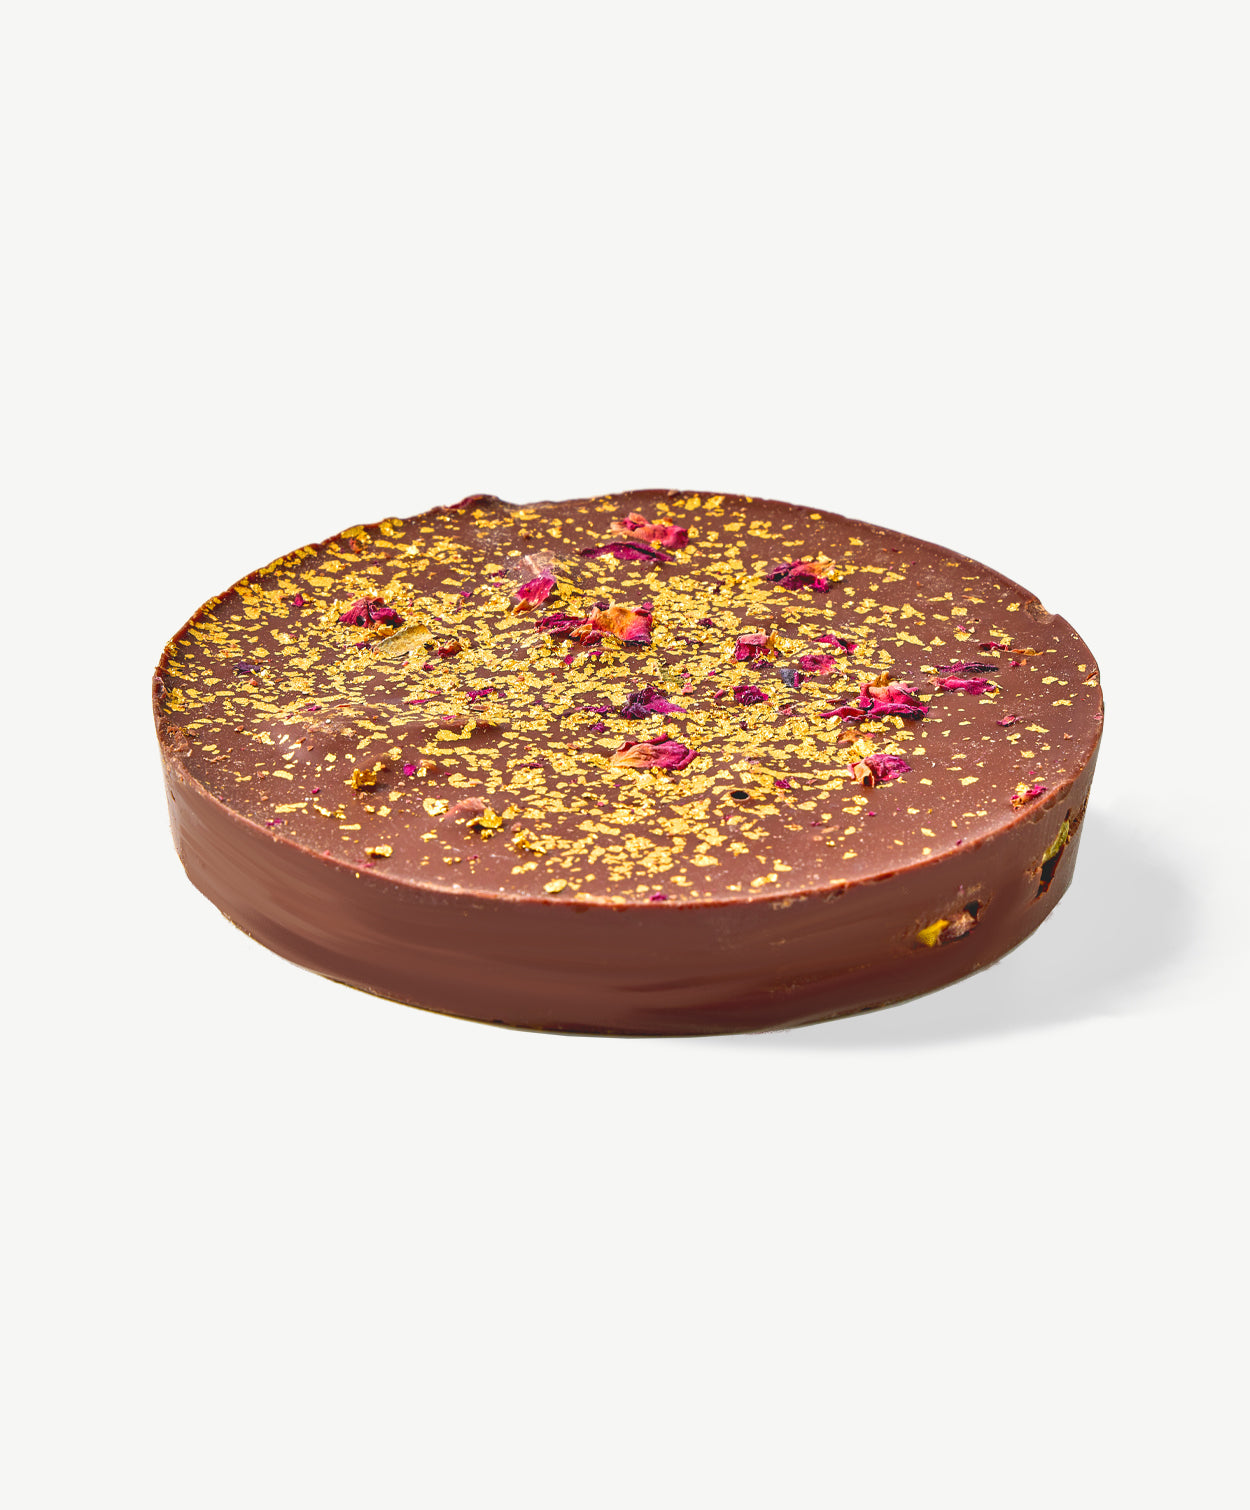 Closeup view of a Vosges Pistachio Marshmallow Chocolate Marshmallow disc topped with flecks of gold leaf, dried rose petals and pistachios on a white background.  